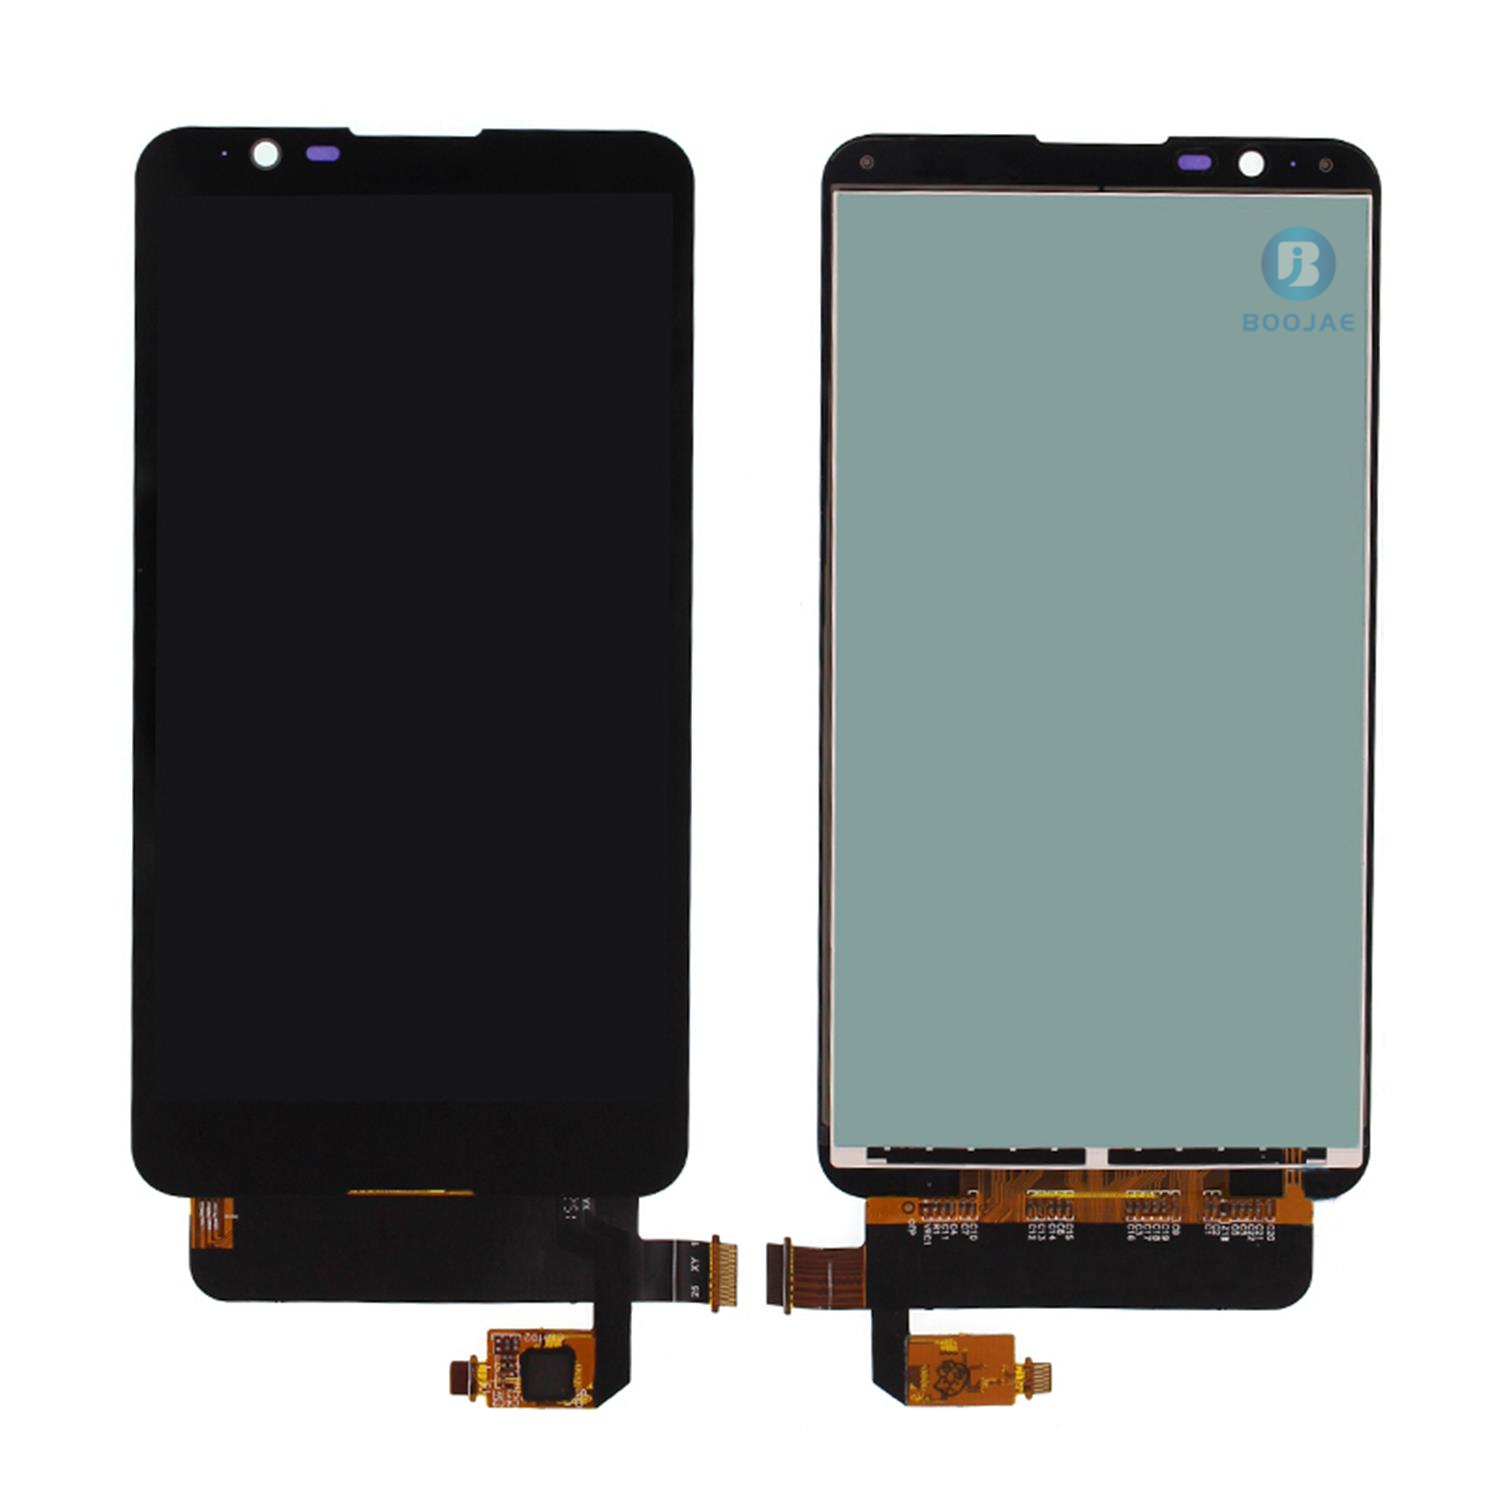 Sony Xperia E4G Lcd Screen Display, Lcd Assembly Replacement